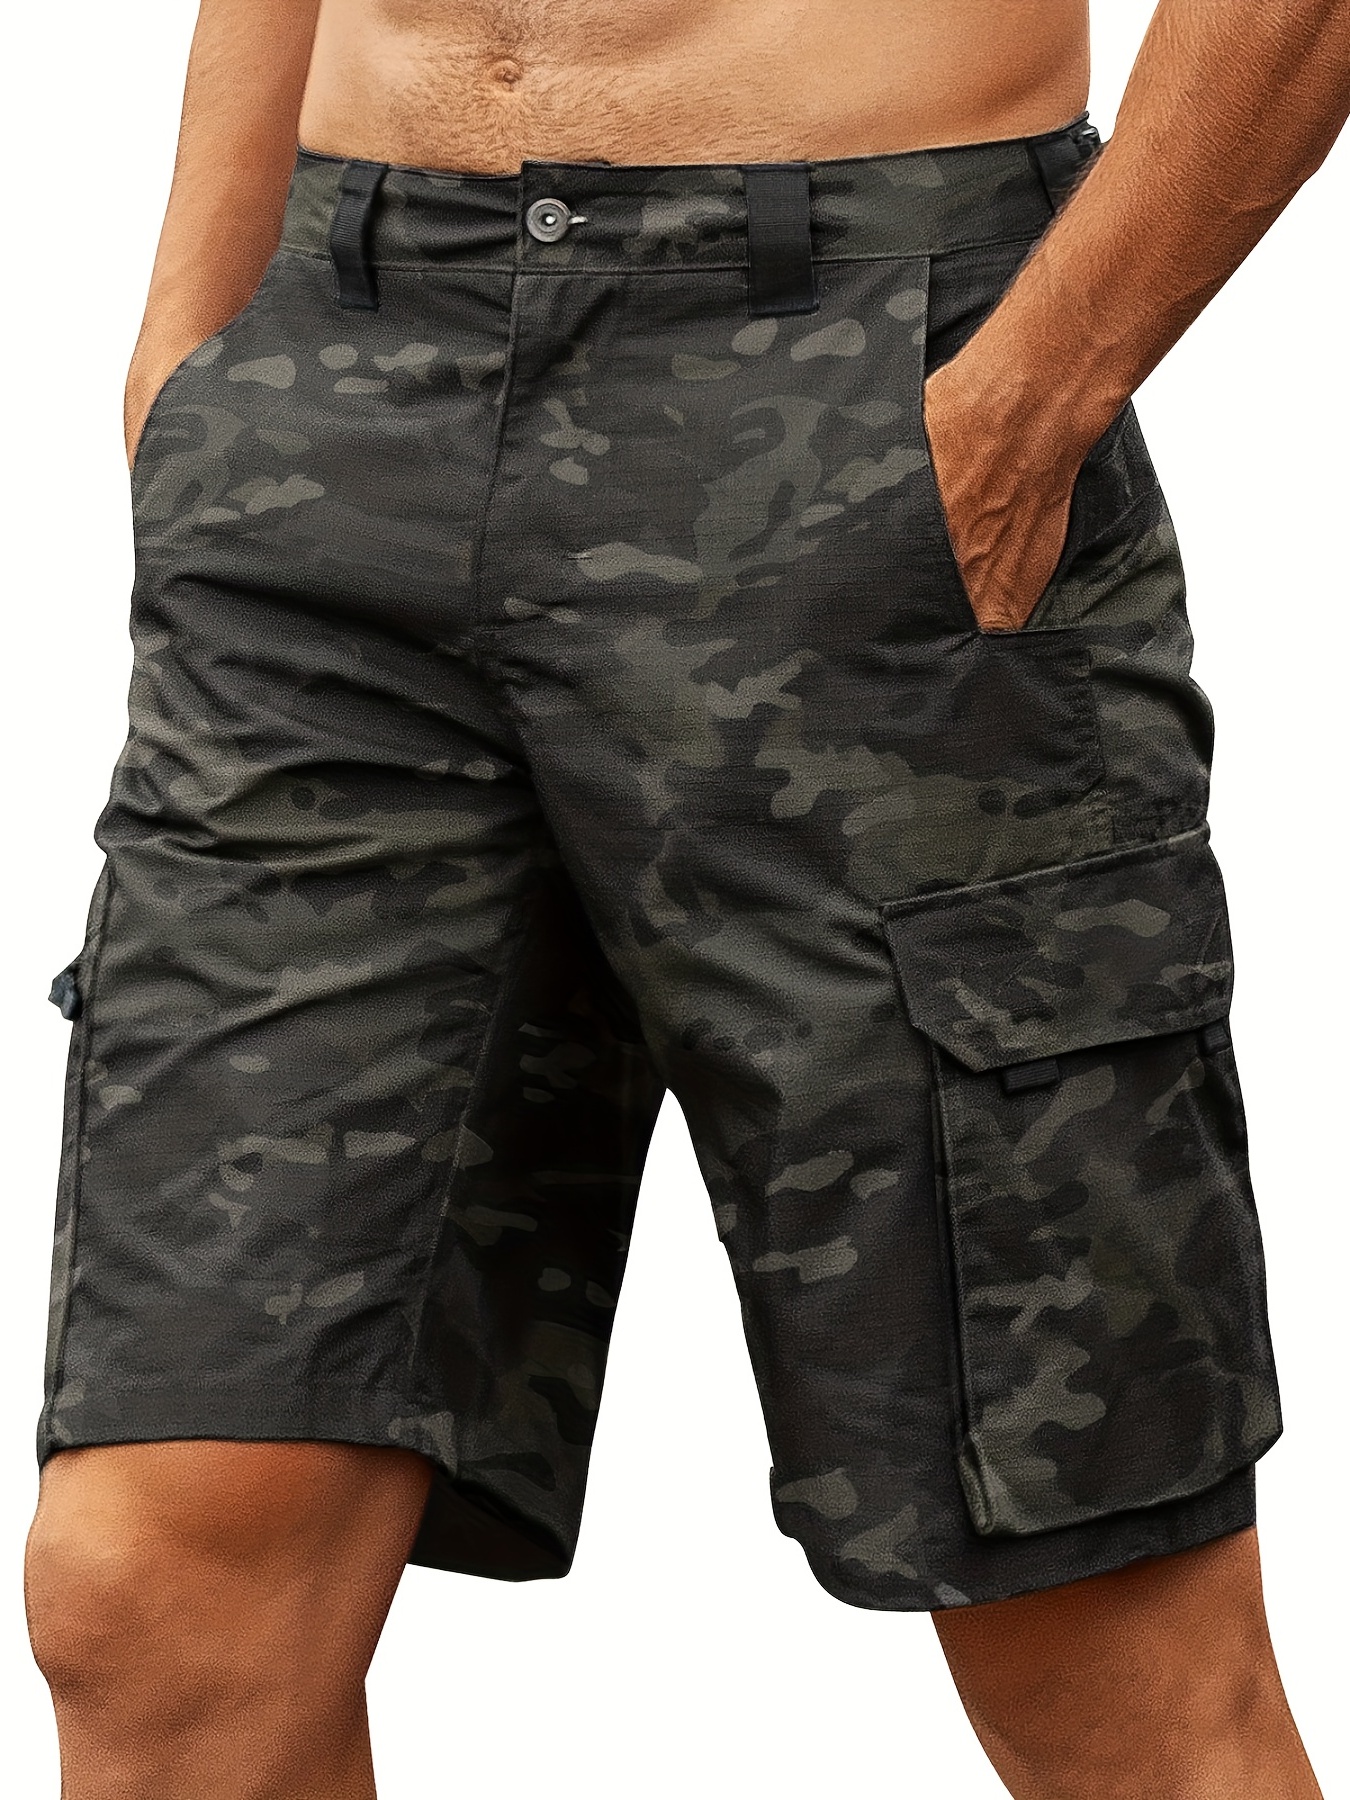 Men's Tactical Cargo Shorts Relaxed Fit Casual Hiking Shorts Outdoor Fishing Golf Shorts With Multi Pockets